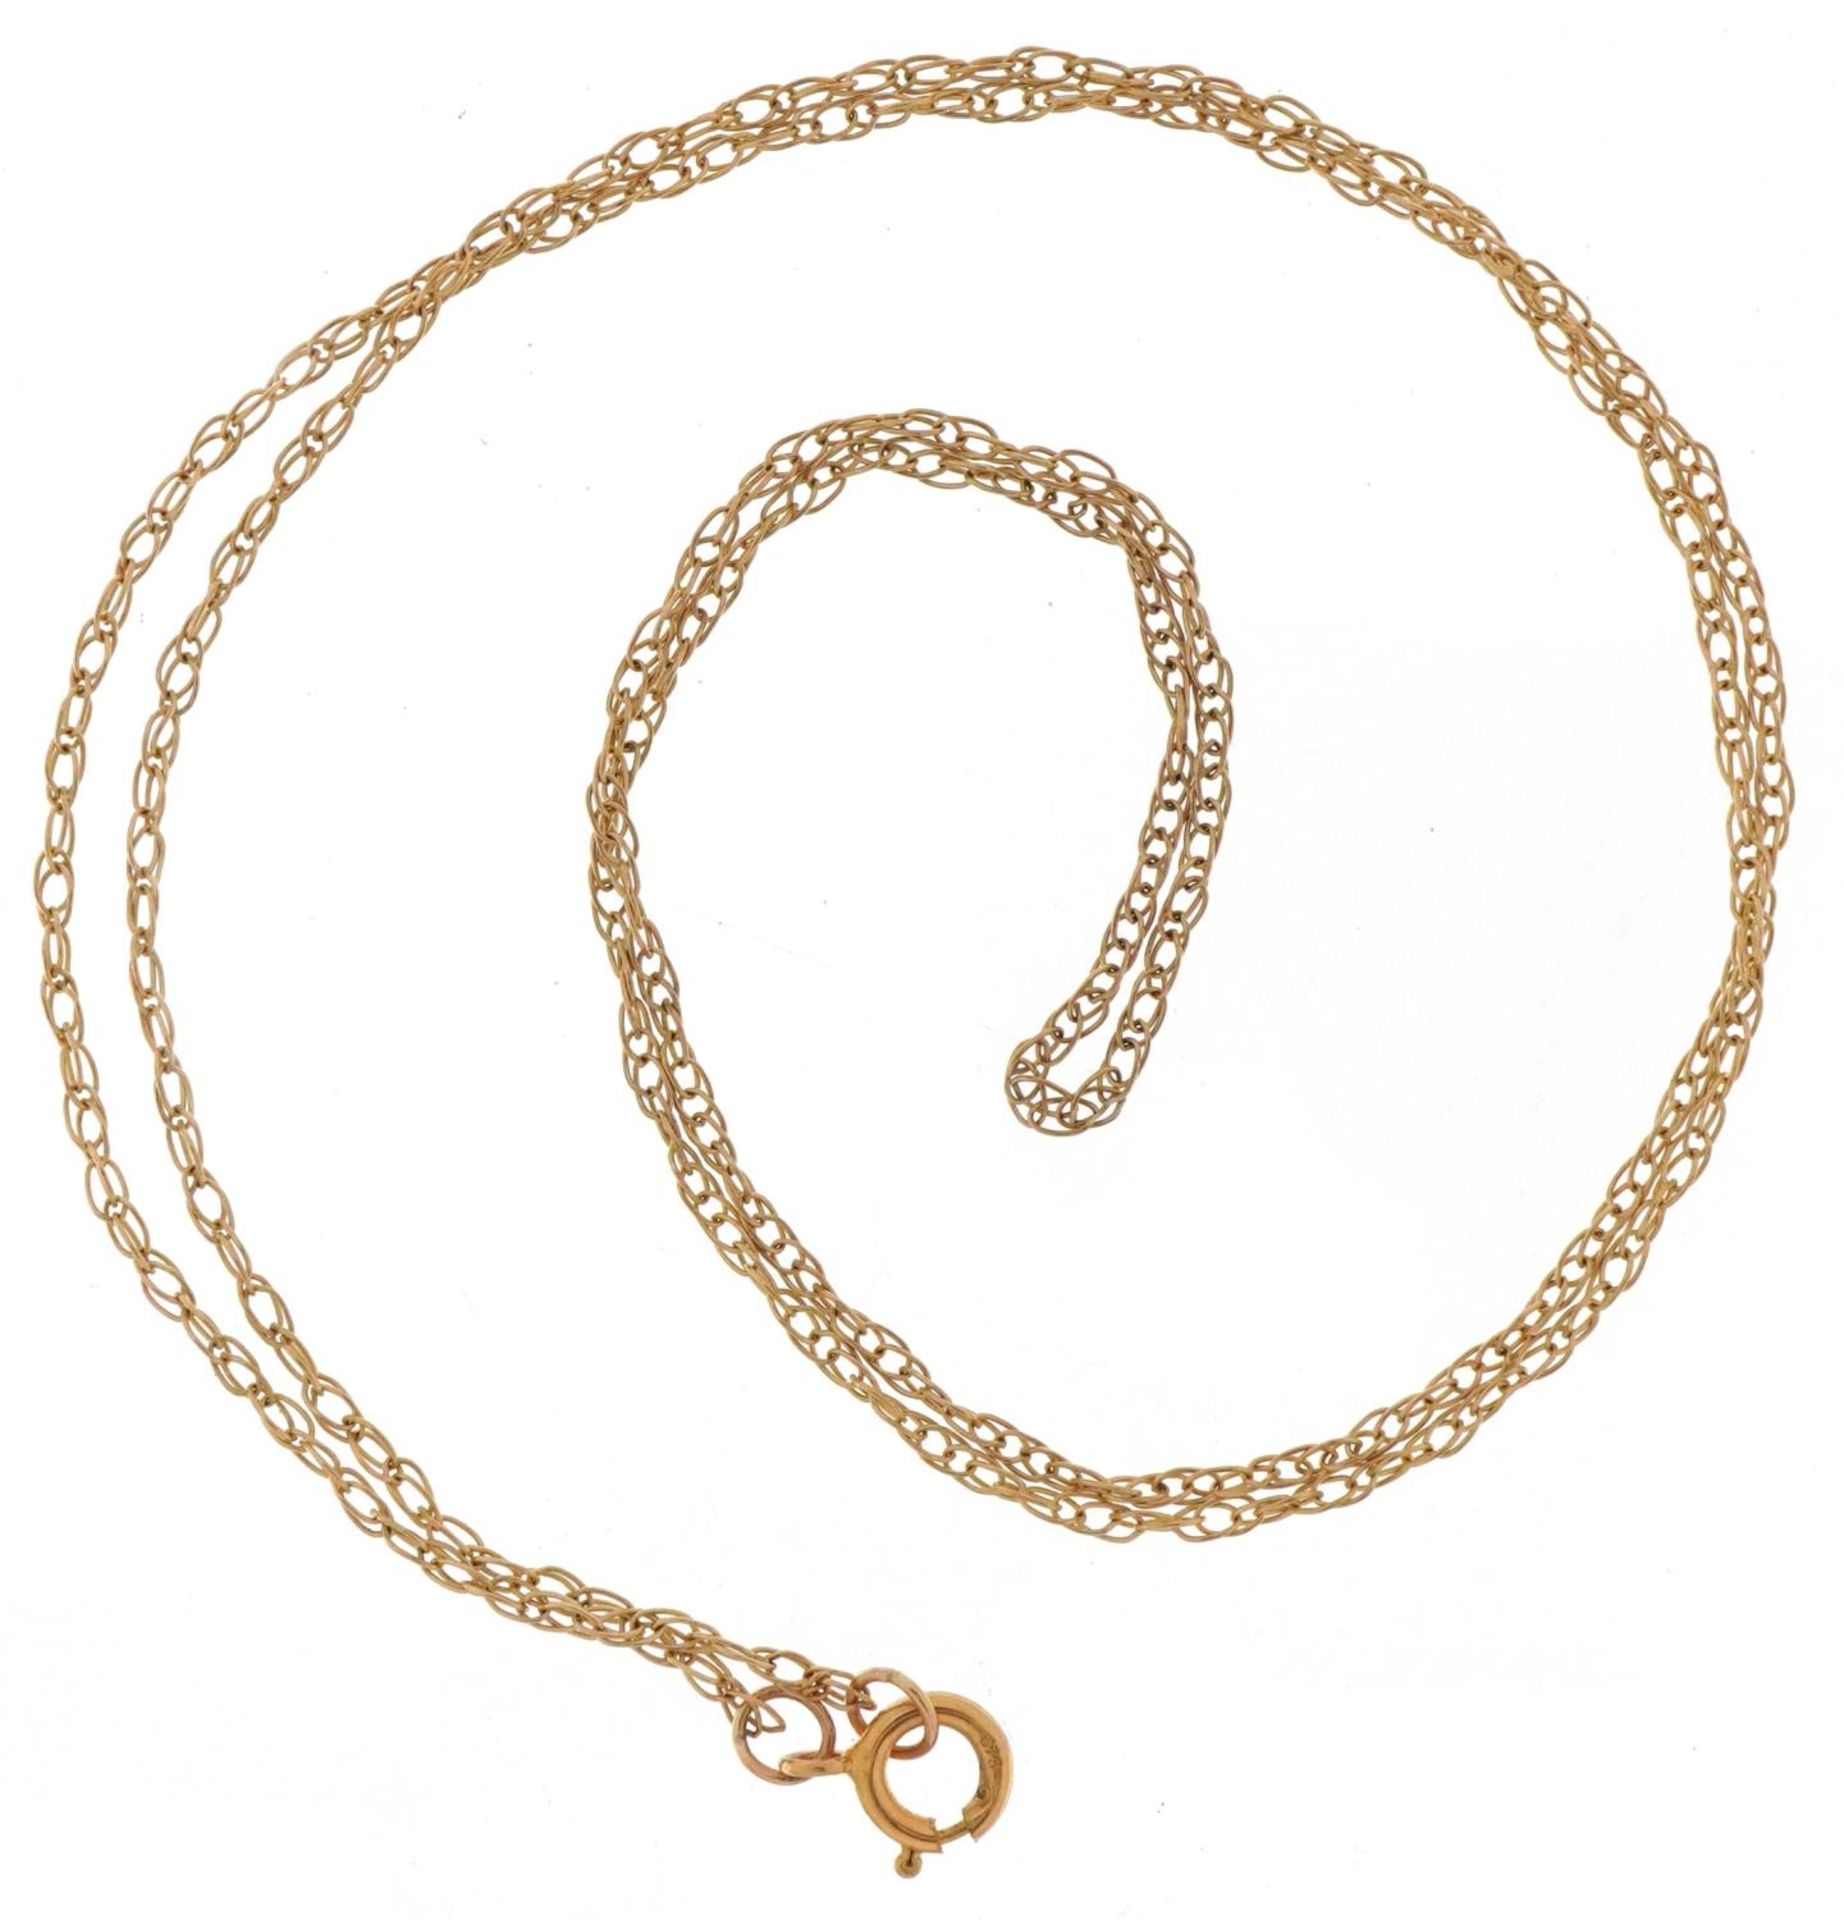 9ct gold fine chain link necklace, 40cm in length, 0.7g - Image 2 of 2